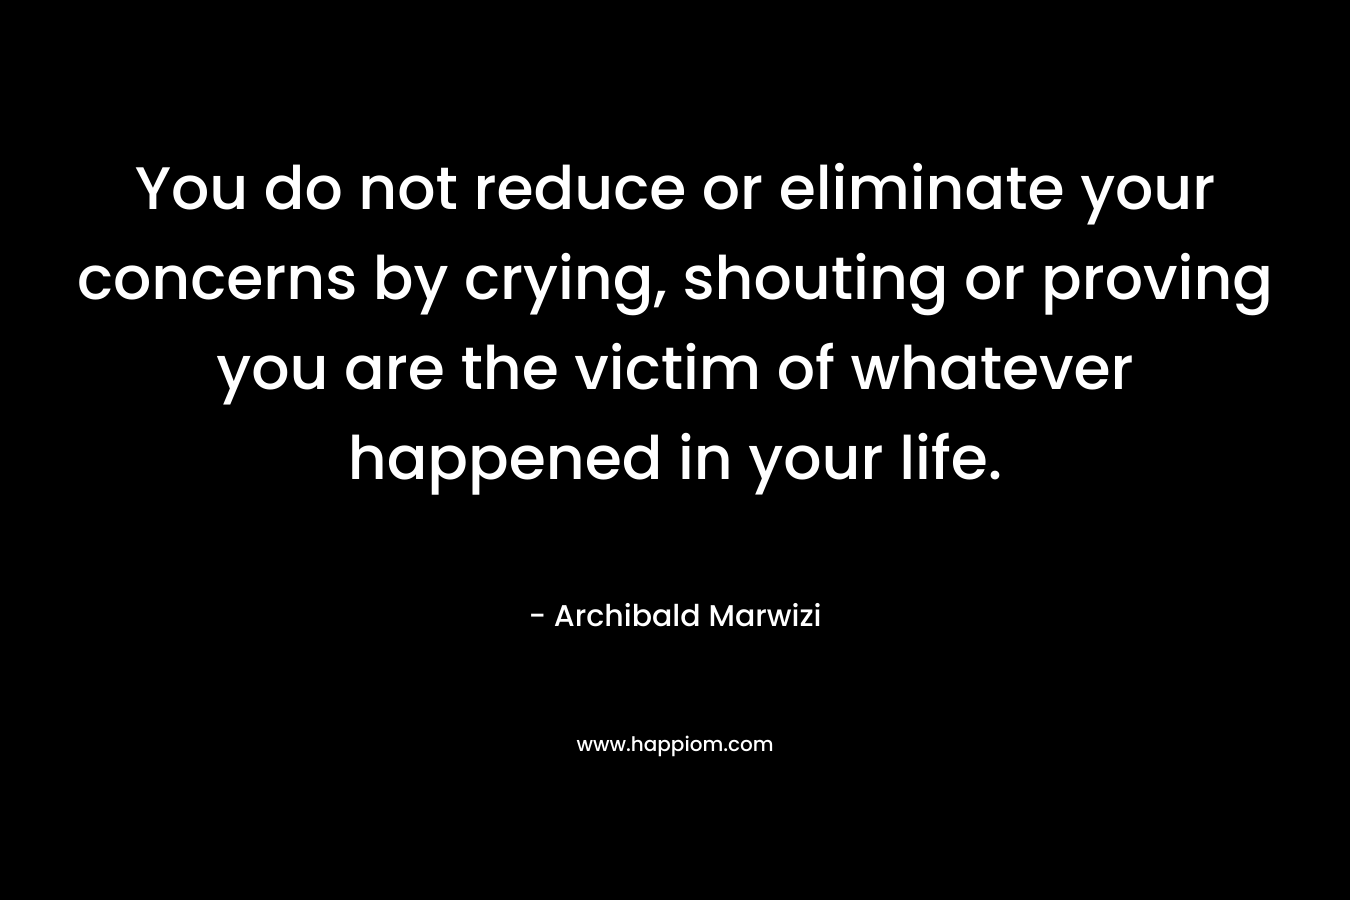 You do not reduce or eliminate your concerns by crying, shouting or proving you are the victim of whatever happened in your life.